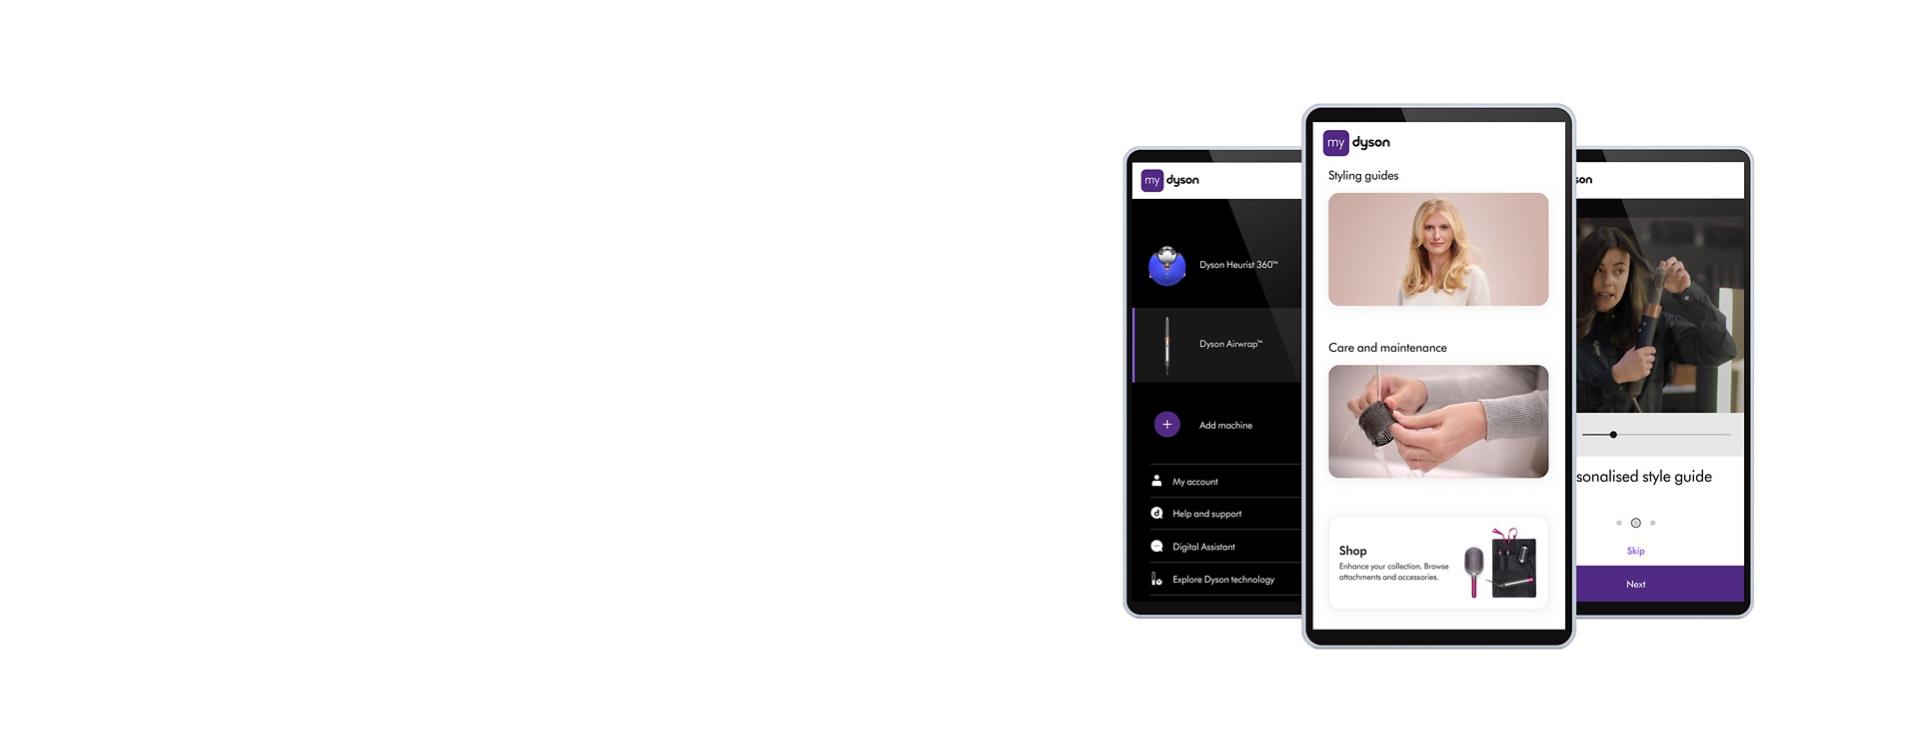 Features within the MyDyson app shown on three different mobile phone screens.